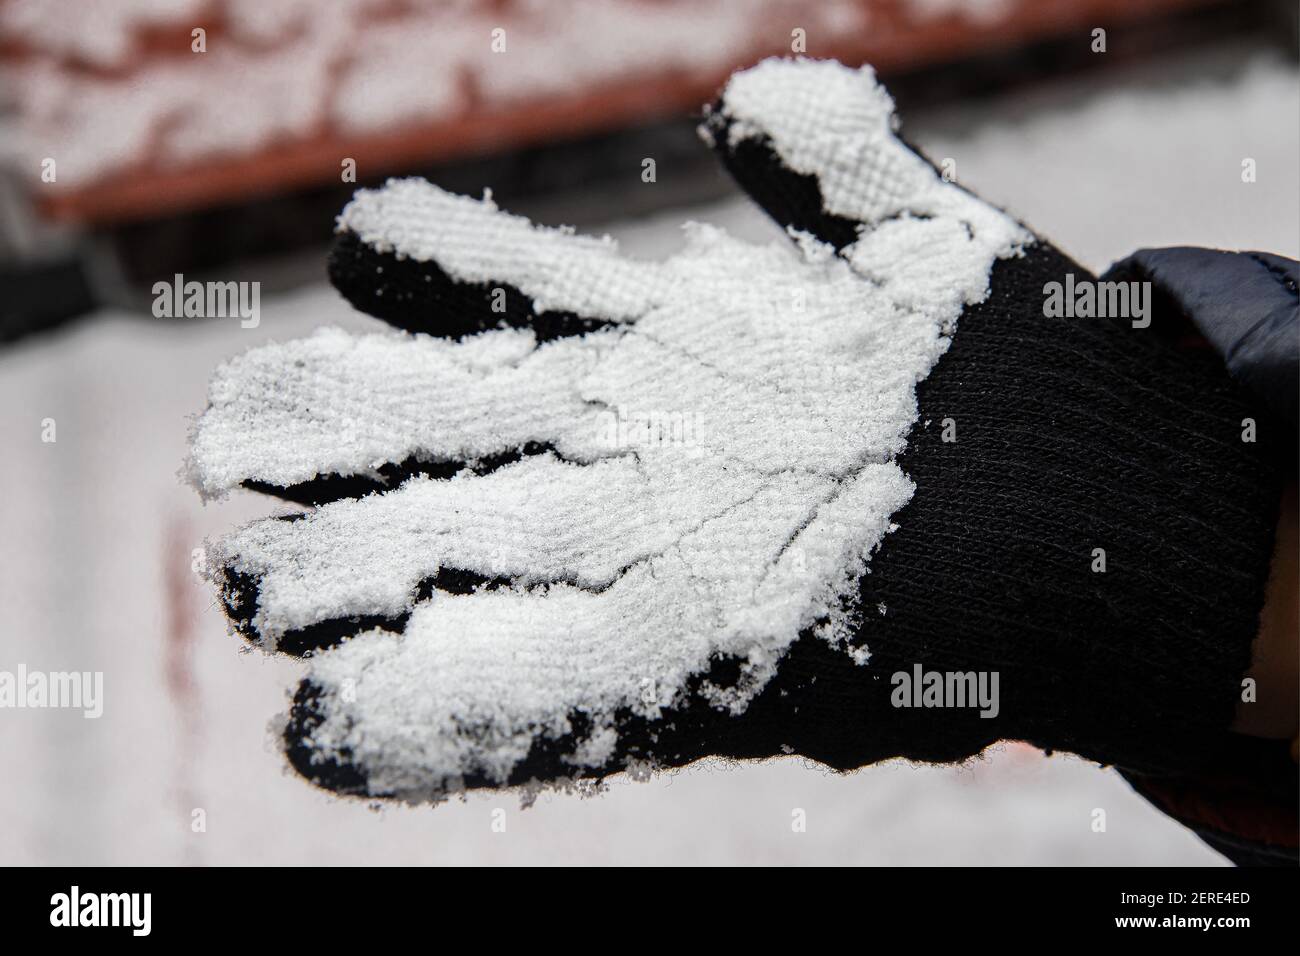 Black gloves on hands in the snow close up Stock Photo